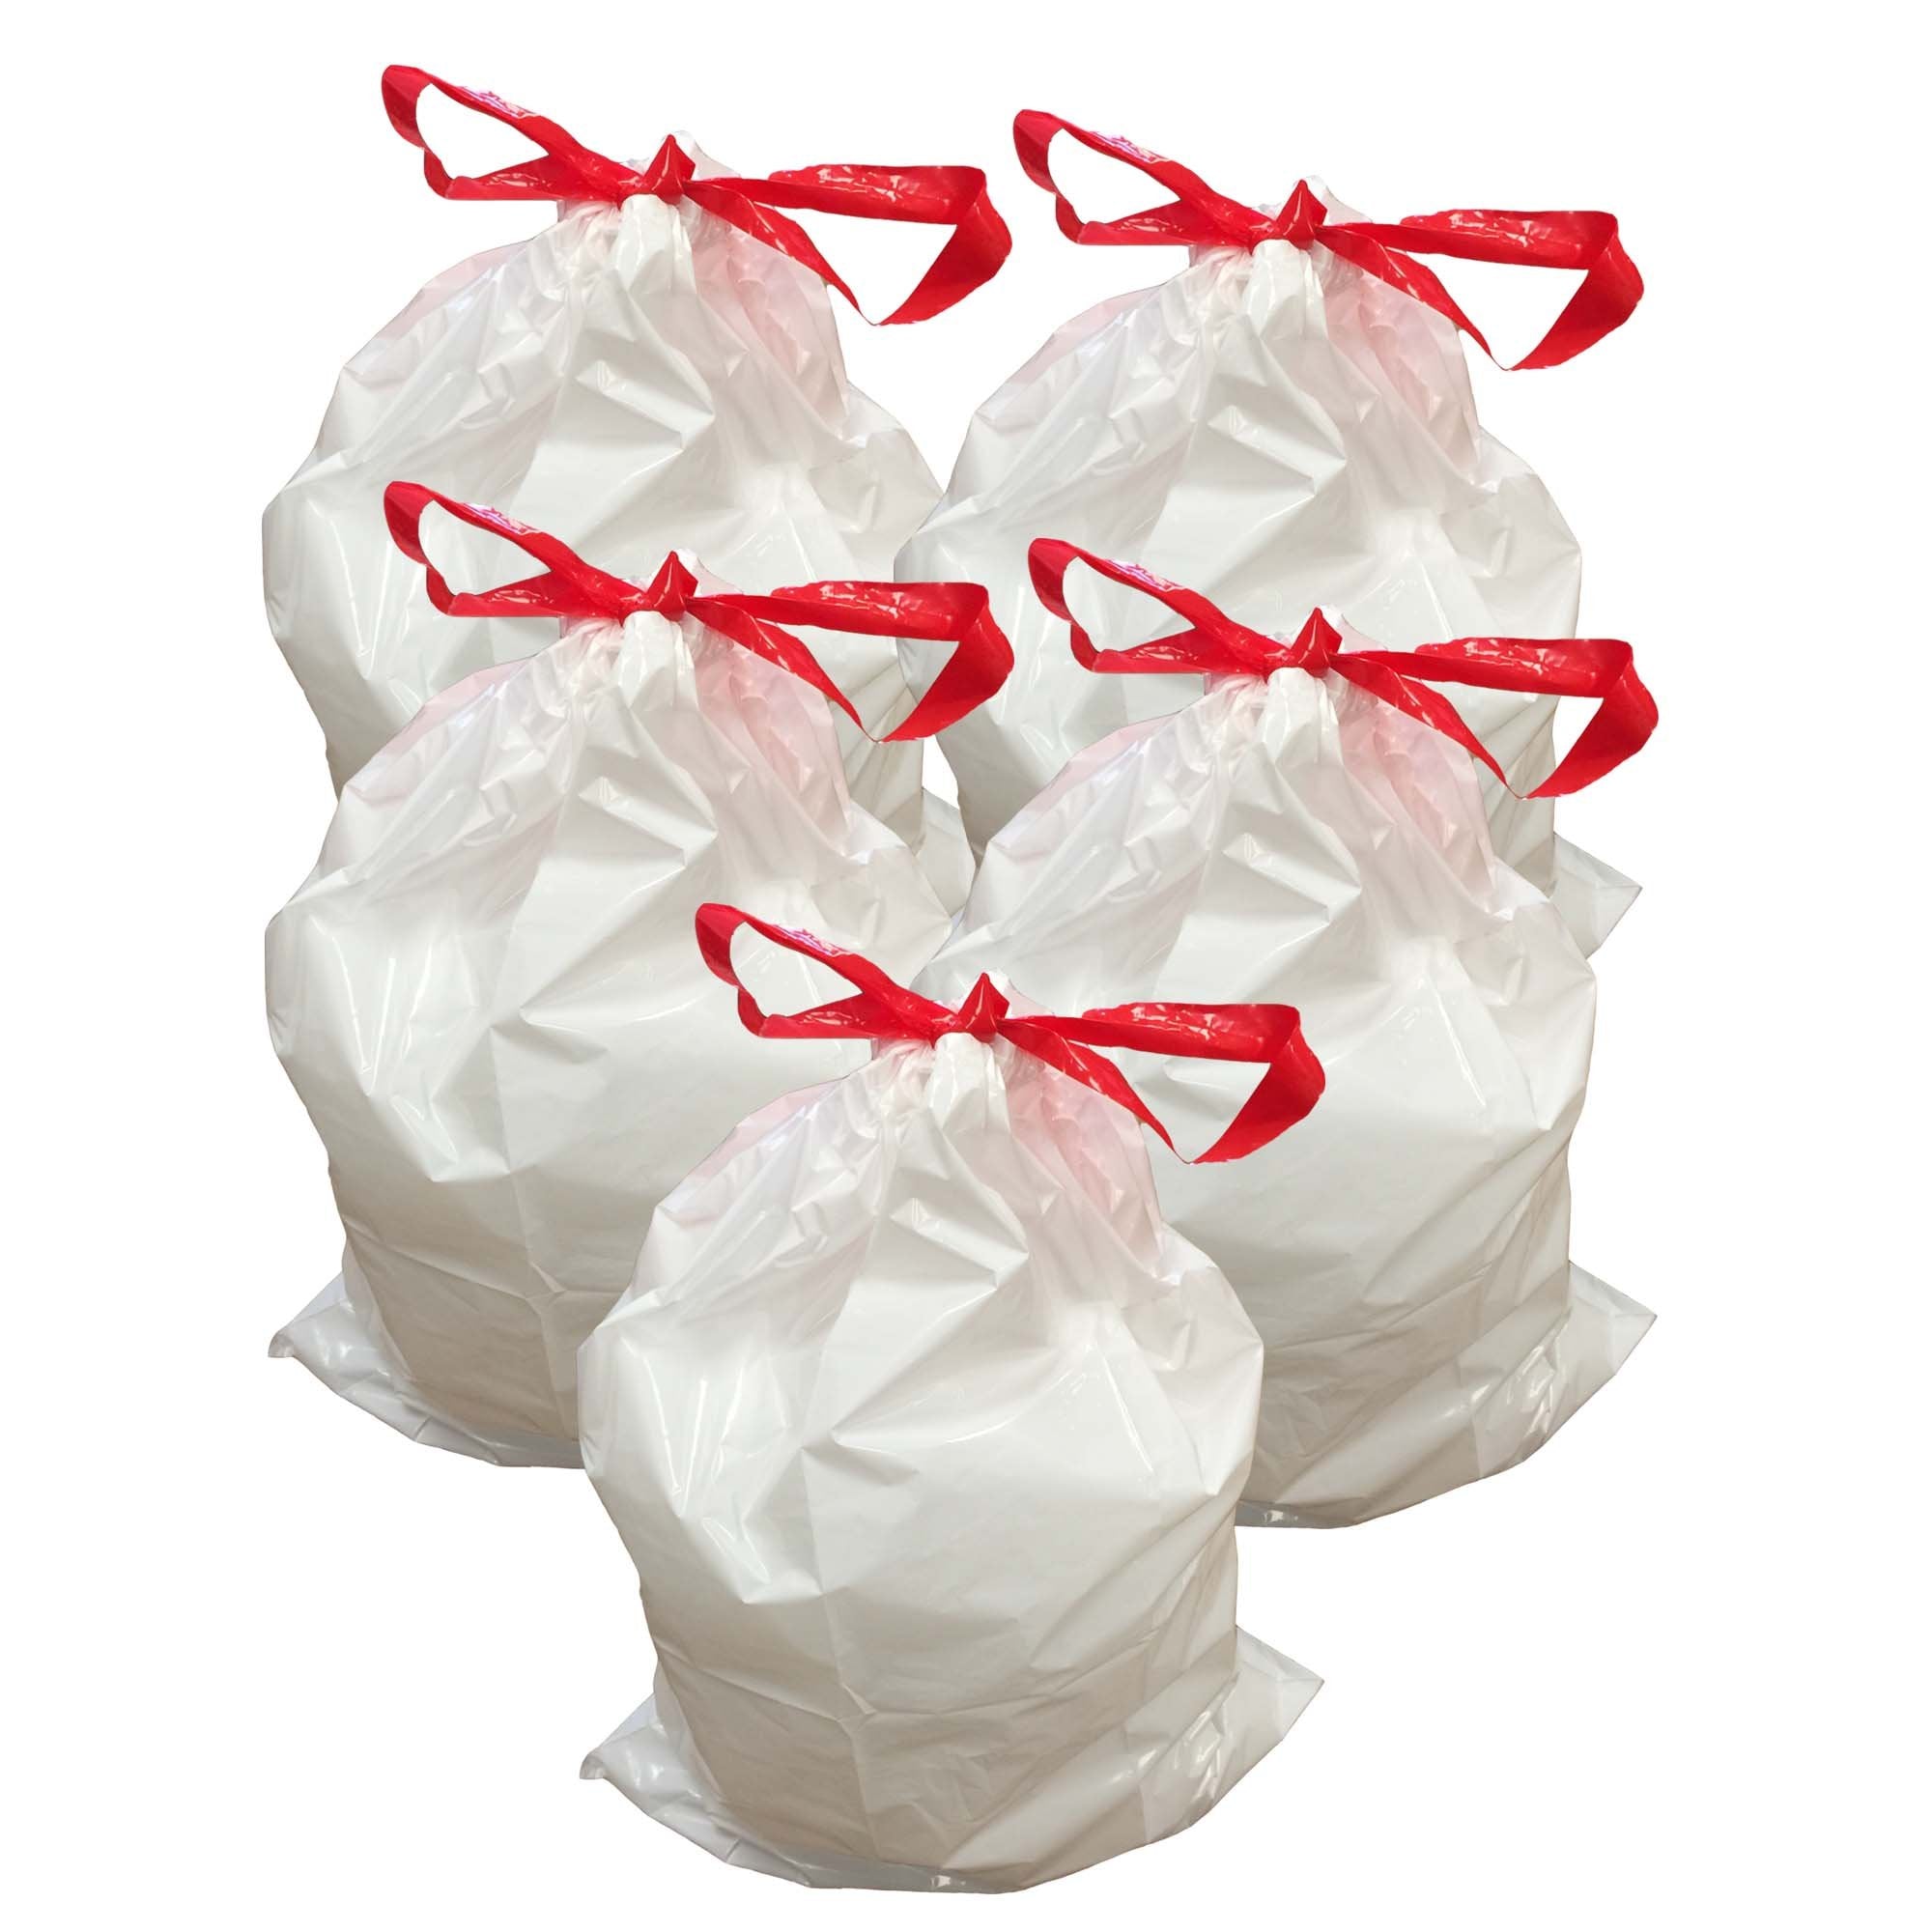  New 220 Light Duty 45 - 50 Gallon Garbage Bags